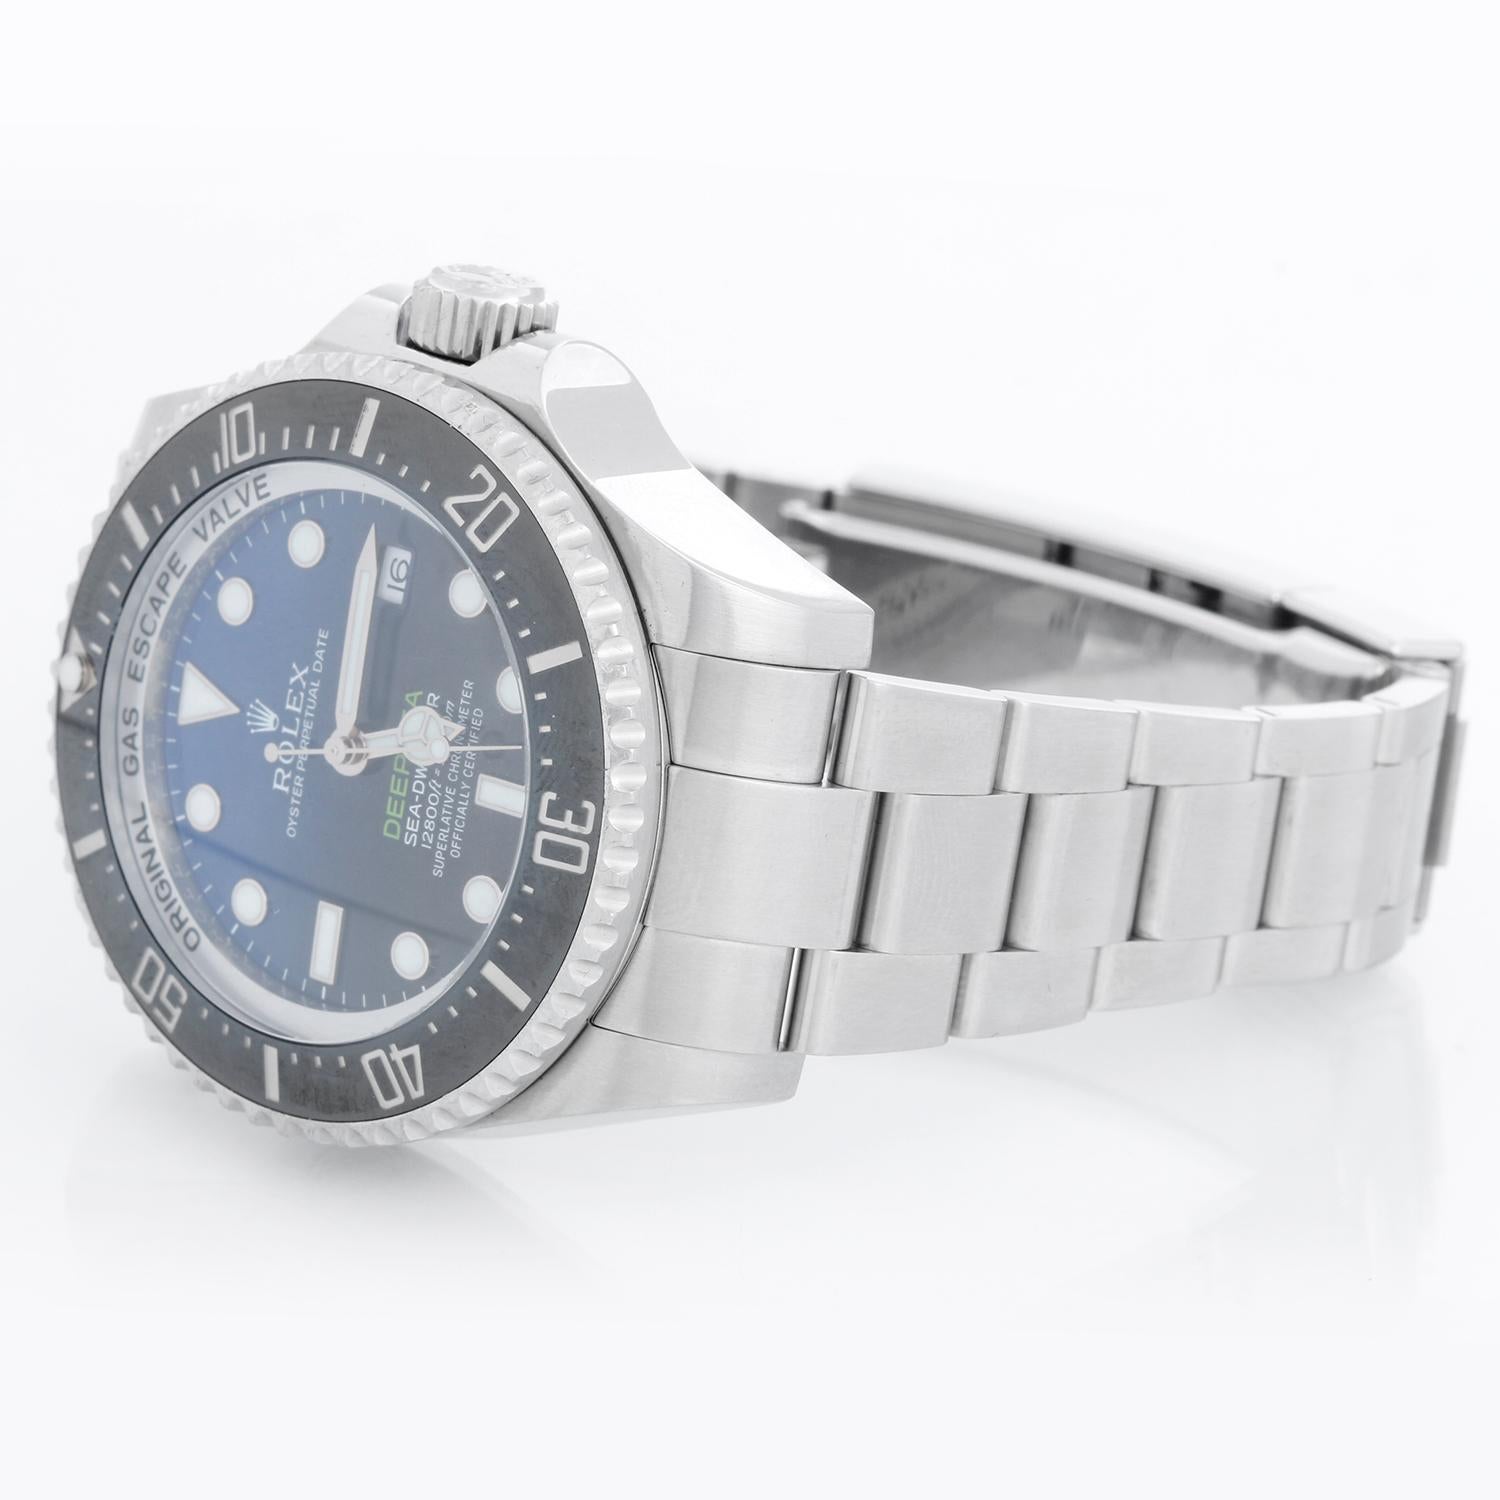 Rolex Sea Dweller-Deep Sea Blue 116660 Men's Watch James Cameron - Automatic. Stainless Steel ( 44mm ). Gradient deep blue with unidirectional rotating ceramic bezel. Oyster bracelet with glide lock and adjustable clasp. Pre-owned with  Rolex box